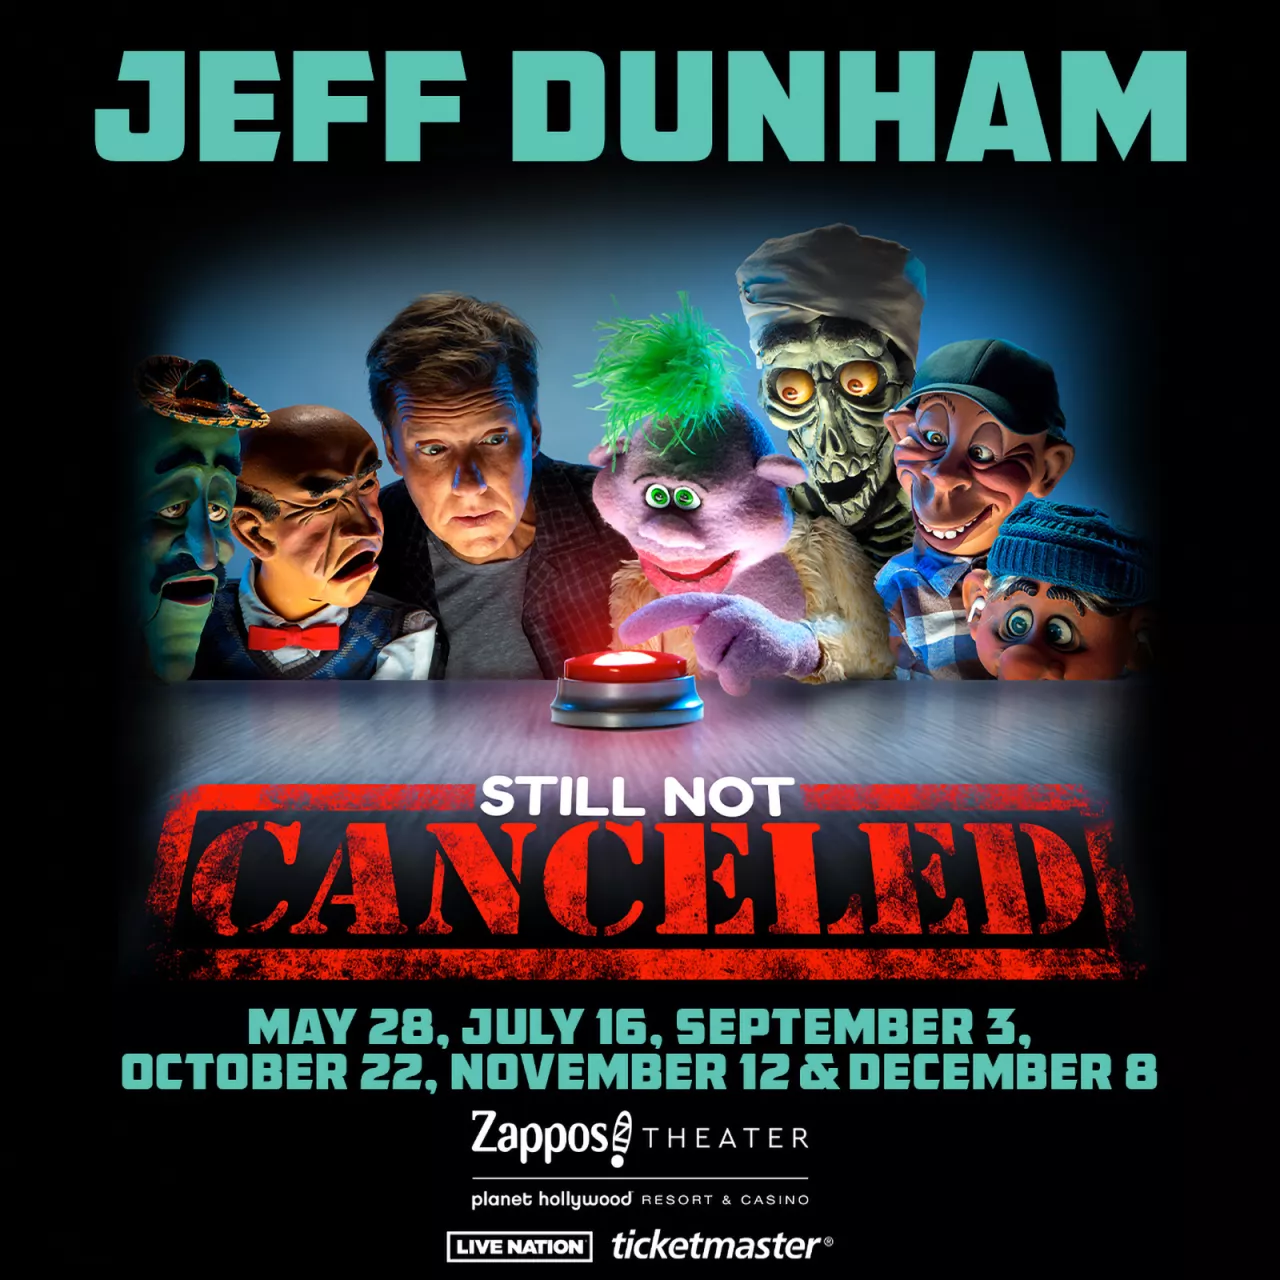 SUPERSTAR JEFF DUNHAM ANNOUNCES SIX 2023 DATES FOR “STILL NOT CANCELED” AT ZAPPOS THEATER AT PLANET HOLLYWOOD RESORT & CASINO img#1